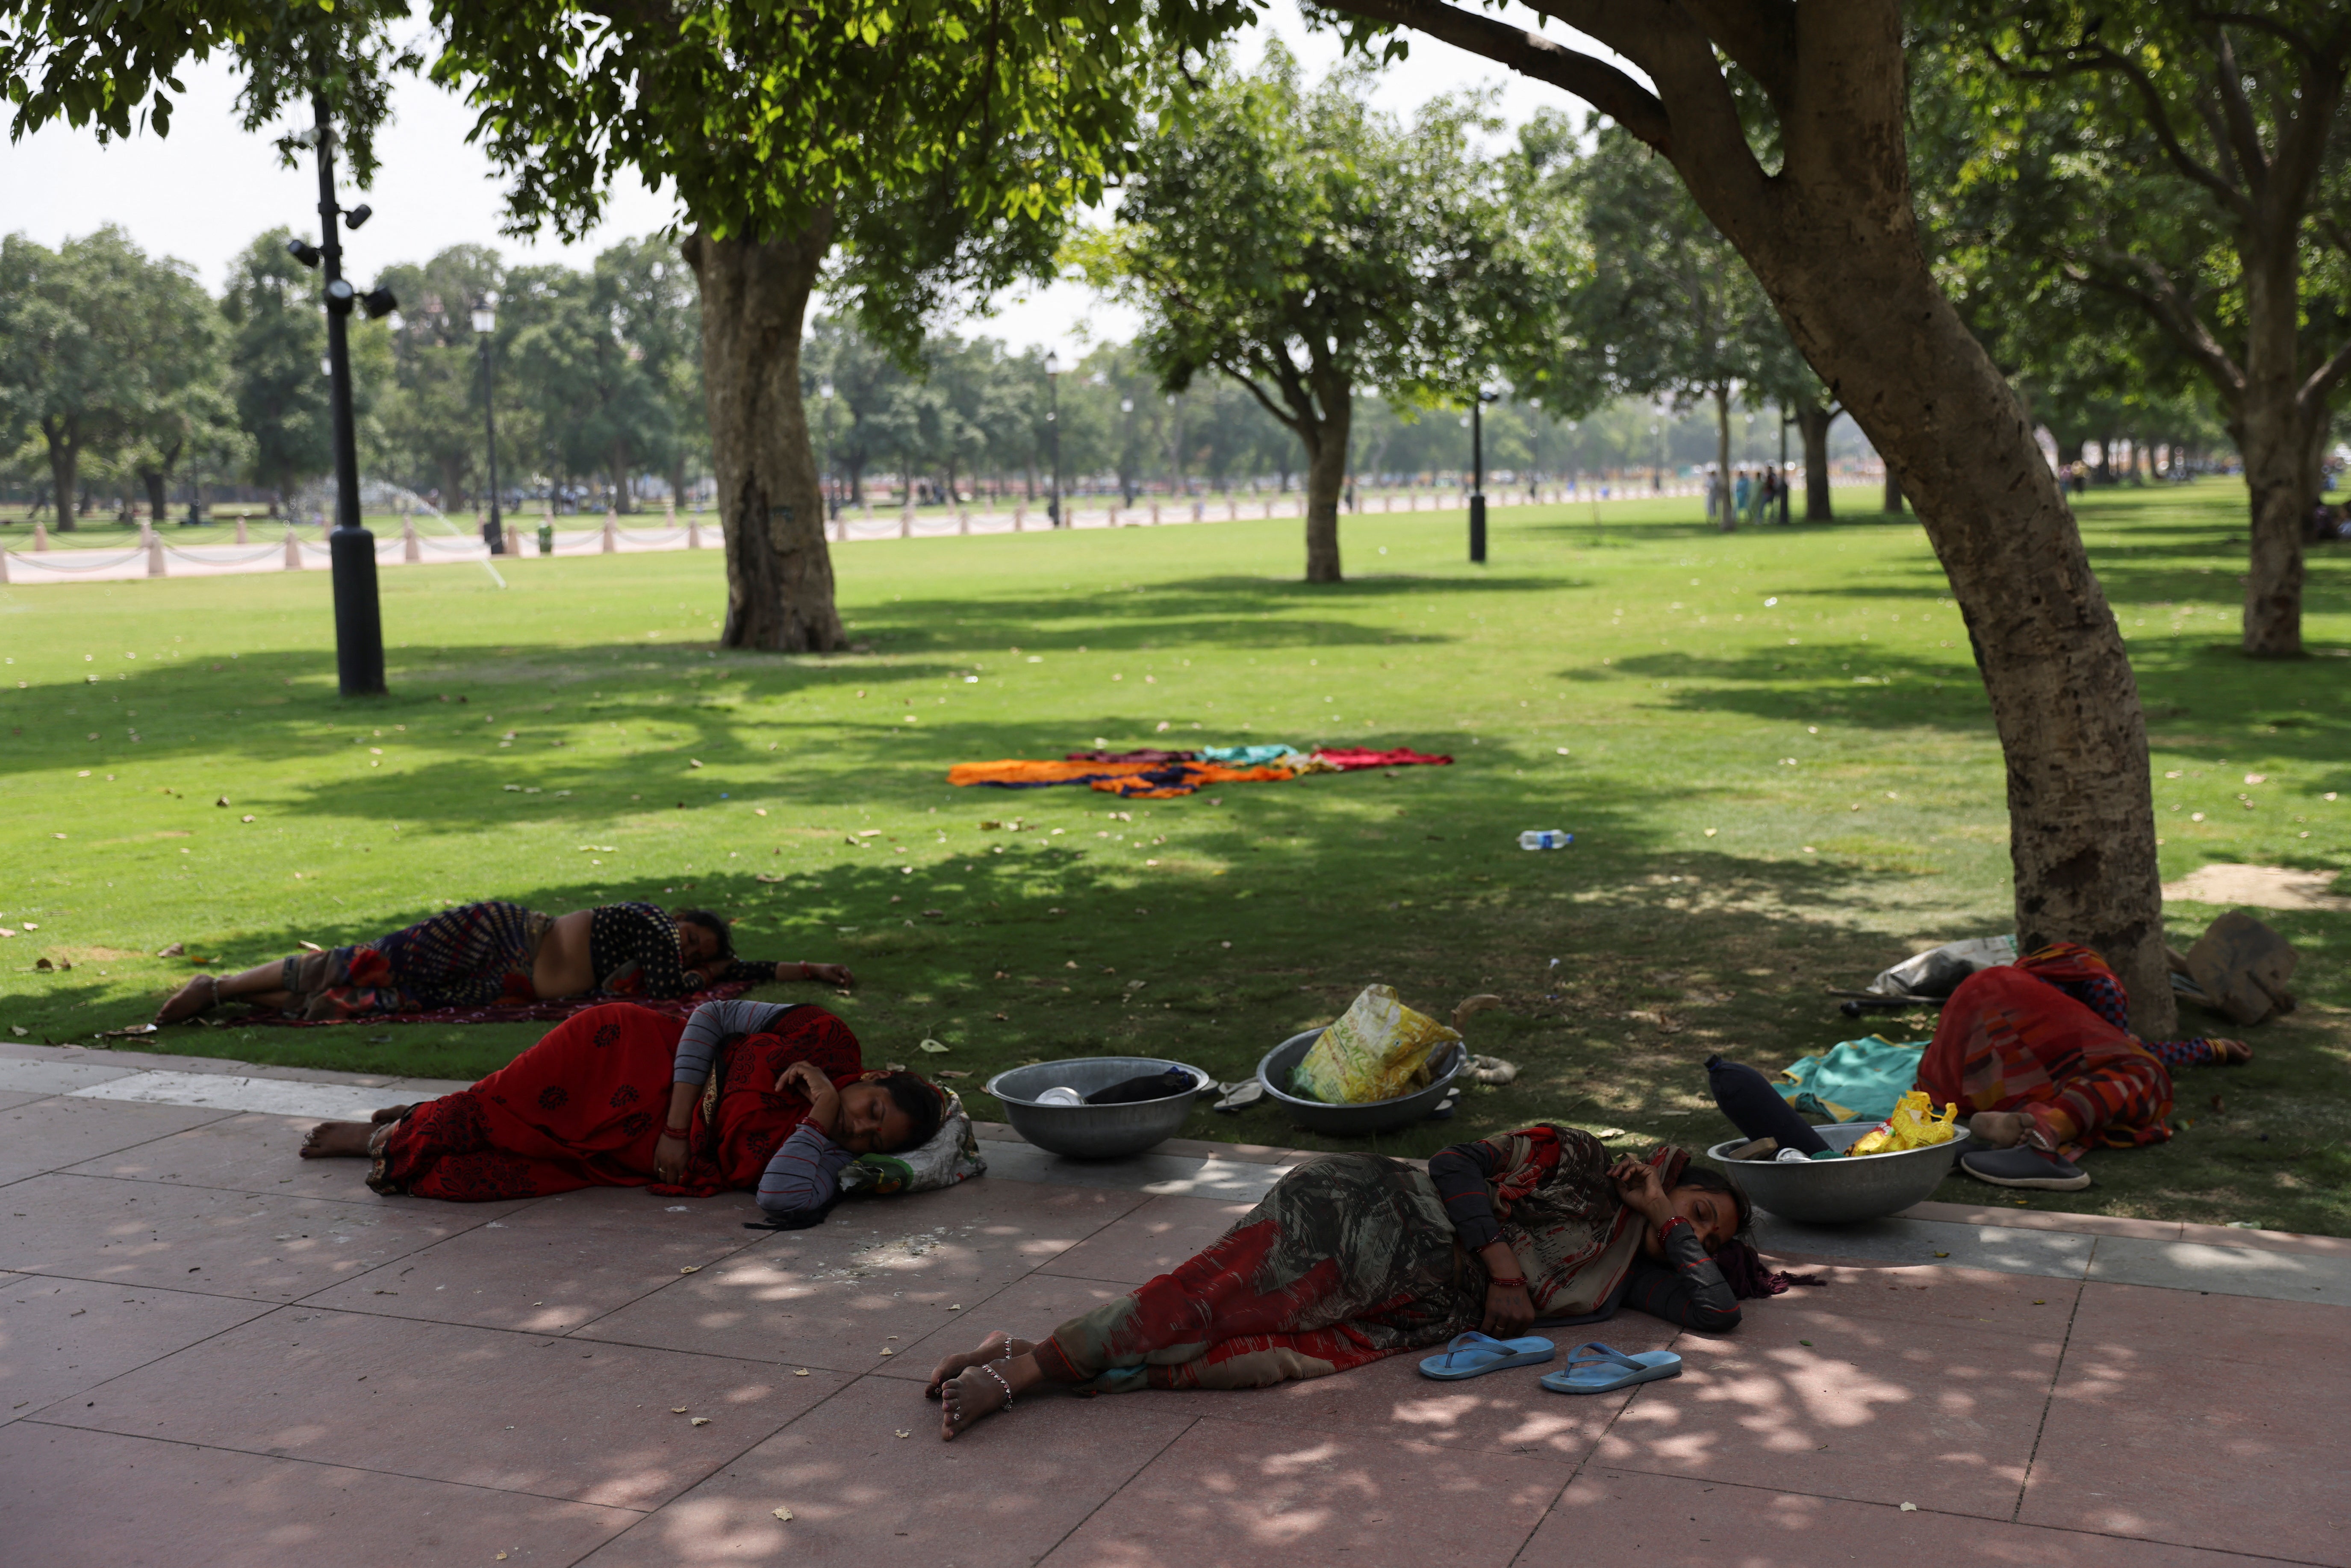 Women labourers rest in the shade of a tree near India Gate, in New Delhi, on May 15